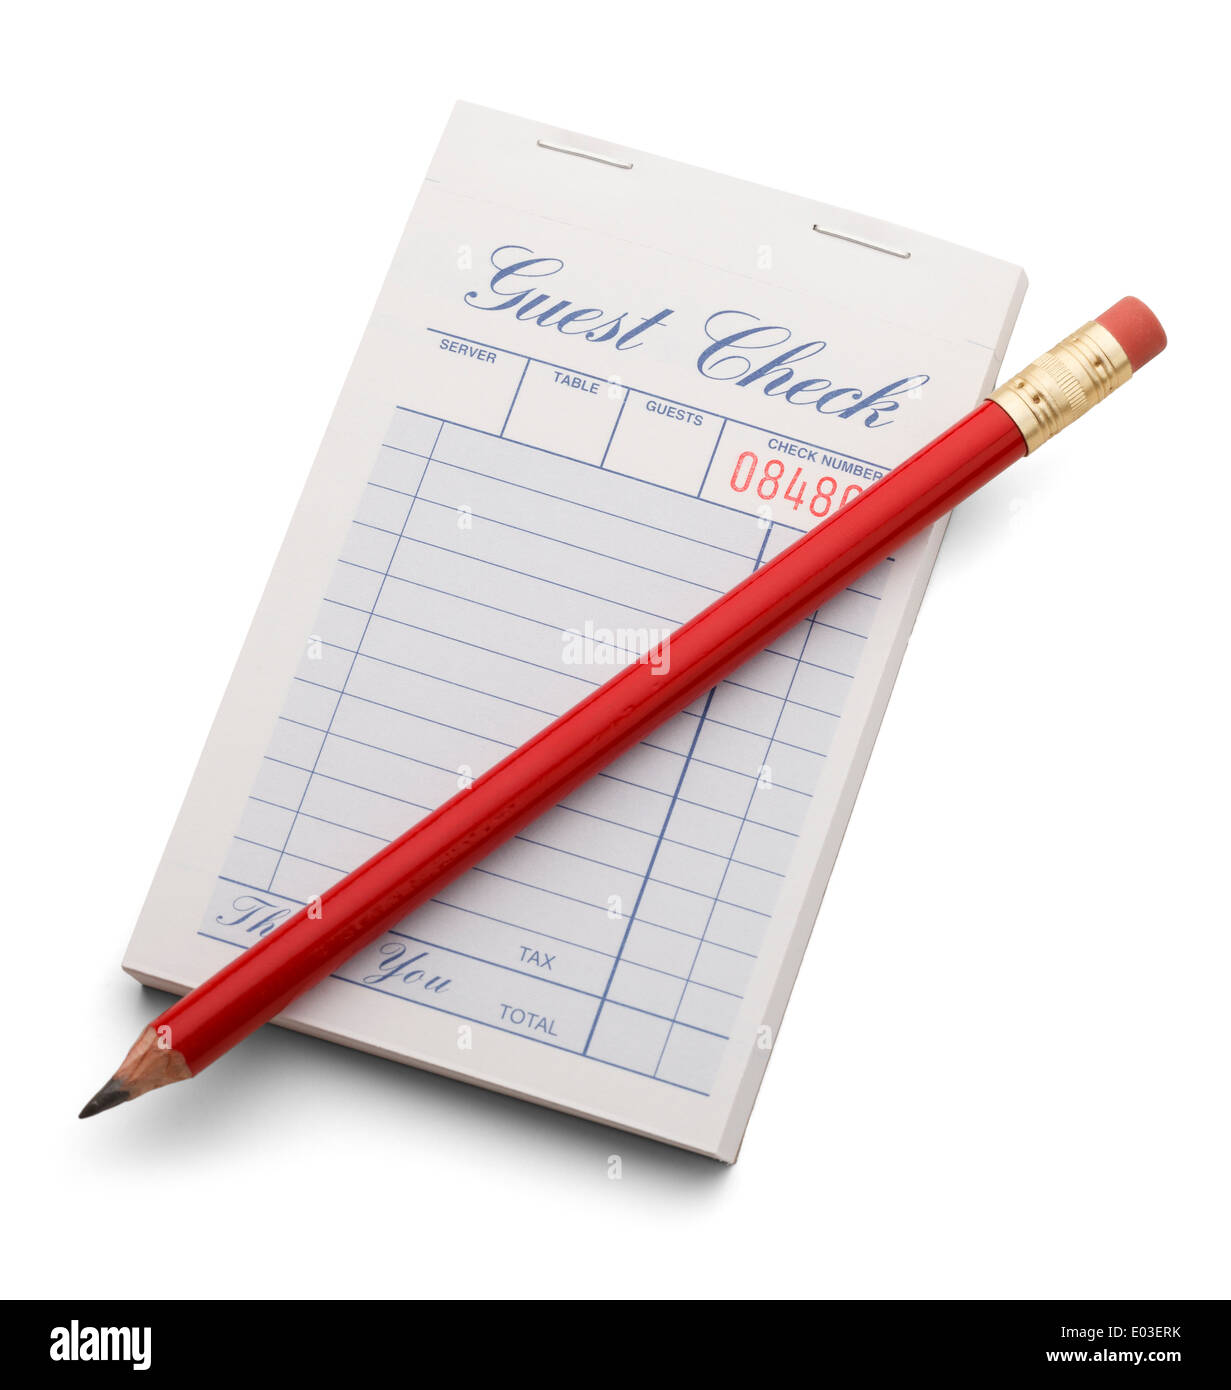 Blank guest check with red pencil isolated on a white background. Stock Photo